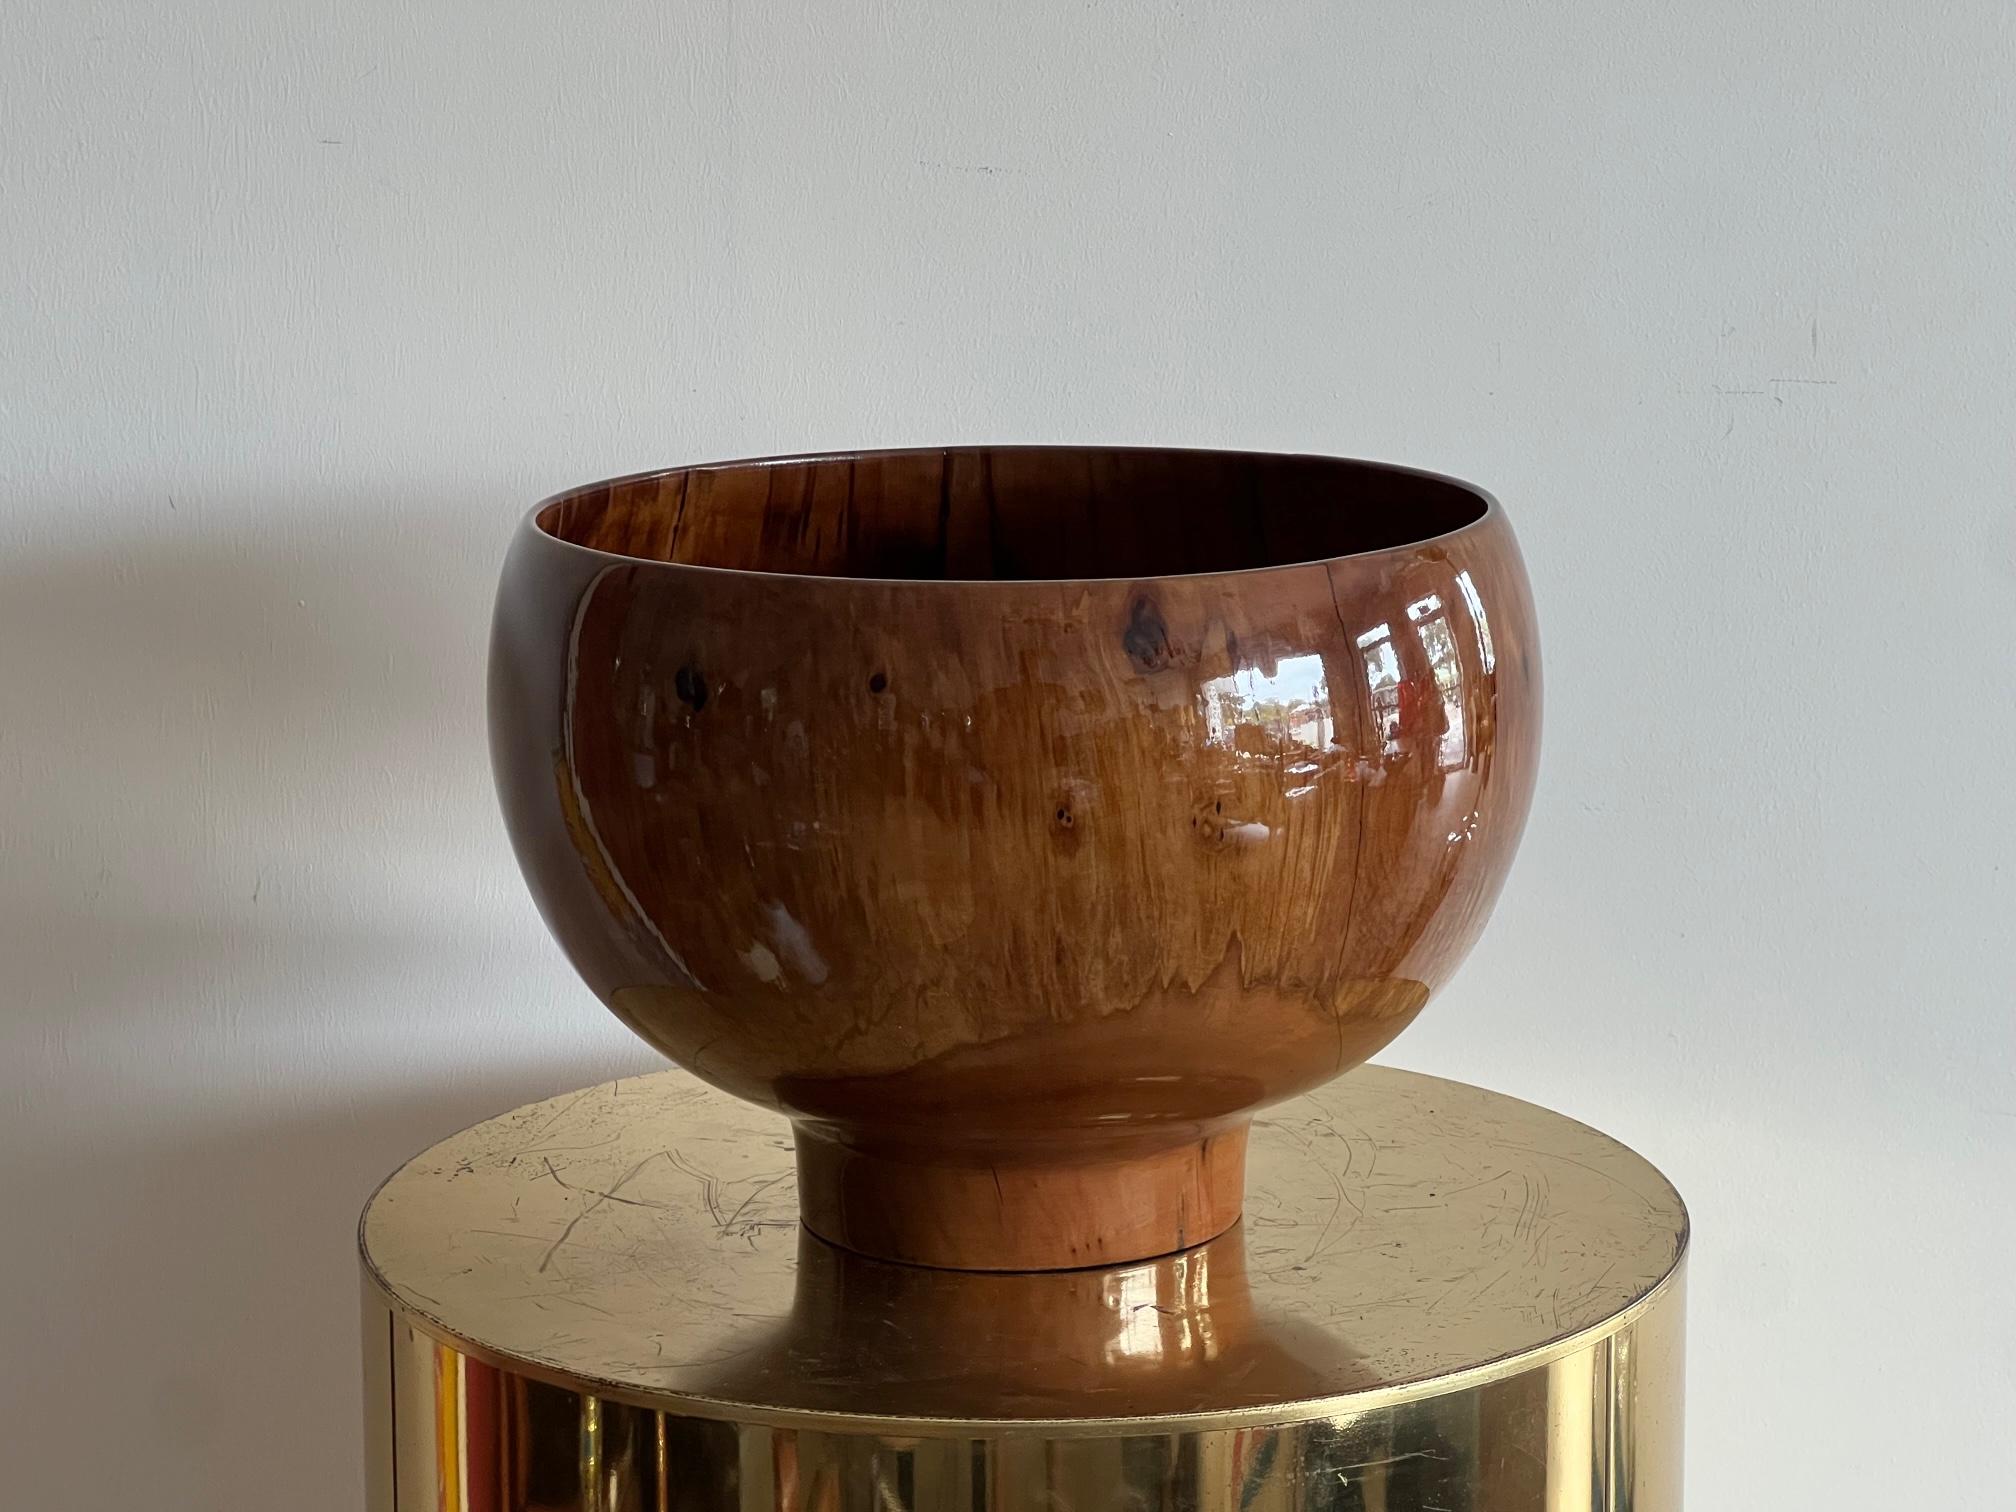 A large and impressive turned centerpiece bowl by Edward Moulthrop. Made of figured sweetgum wood and signed on the bottom. With highly reflective 